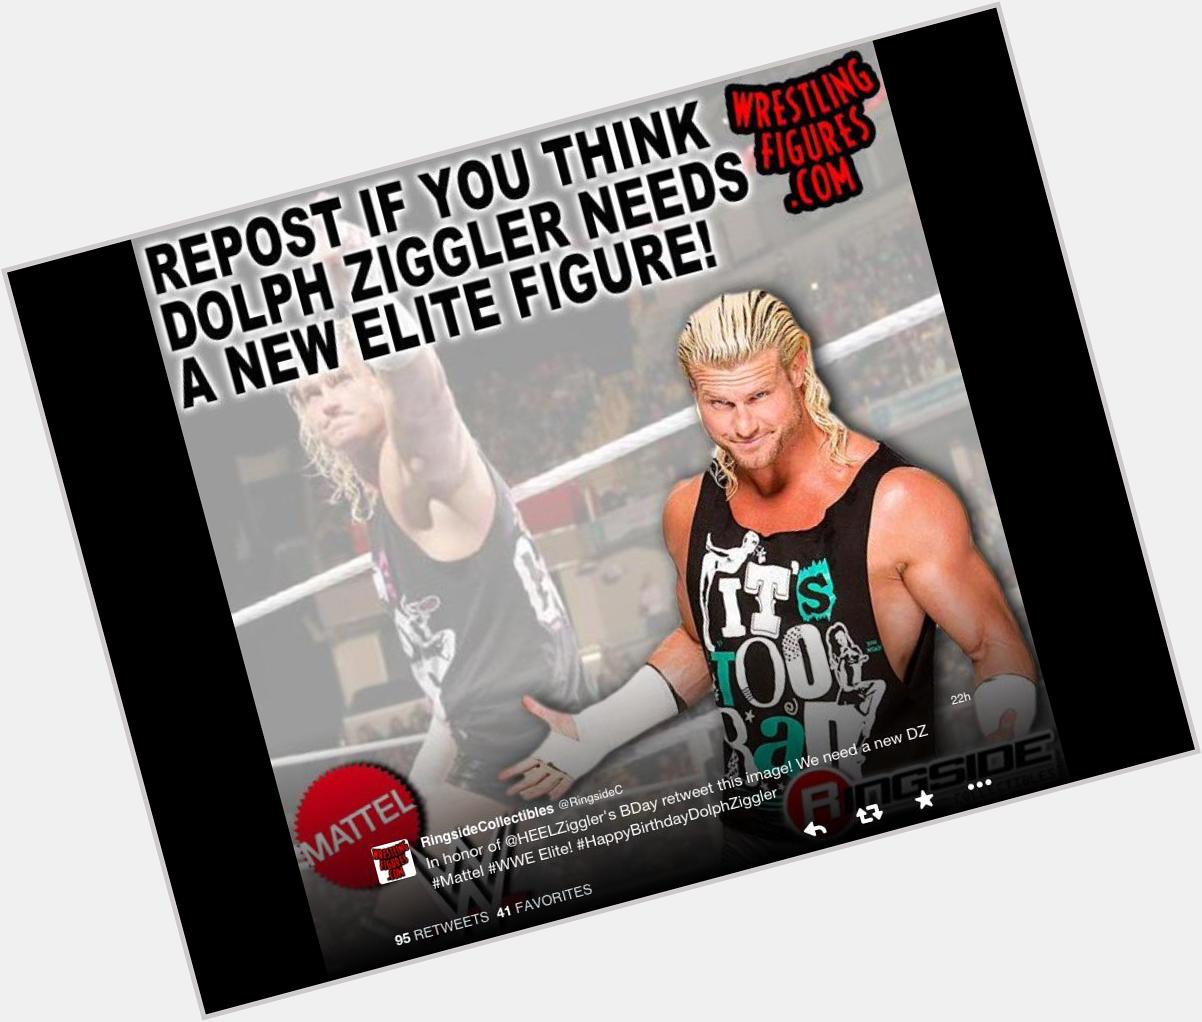 I totally think Dolph Ziggler needs a new elite figure and happy bday Ziggler. 